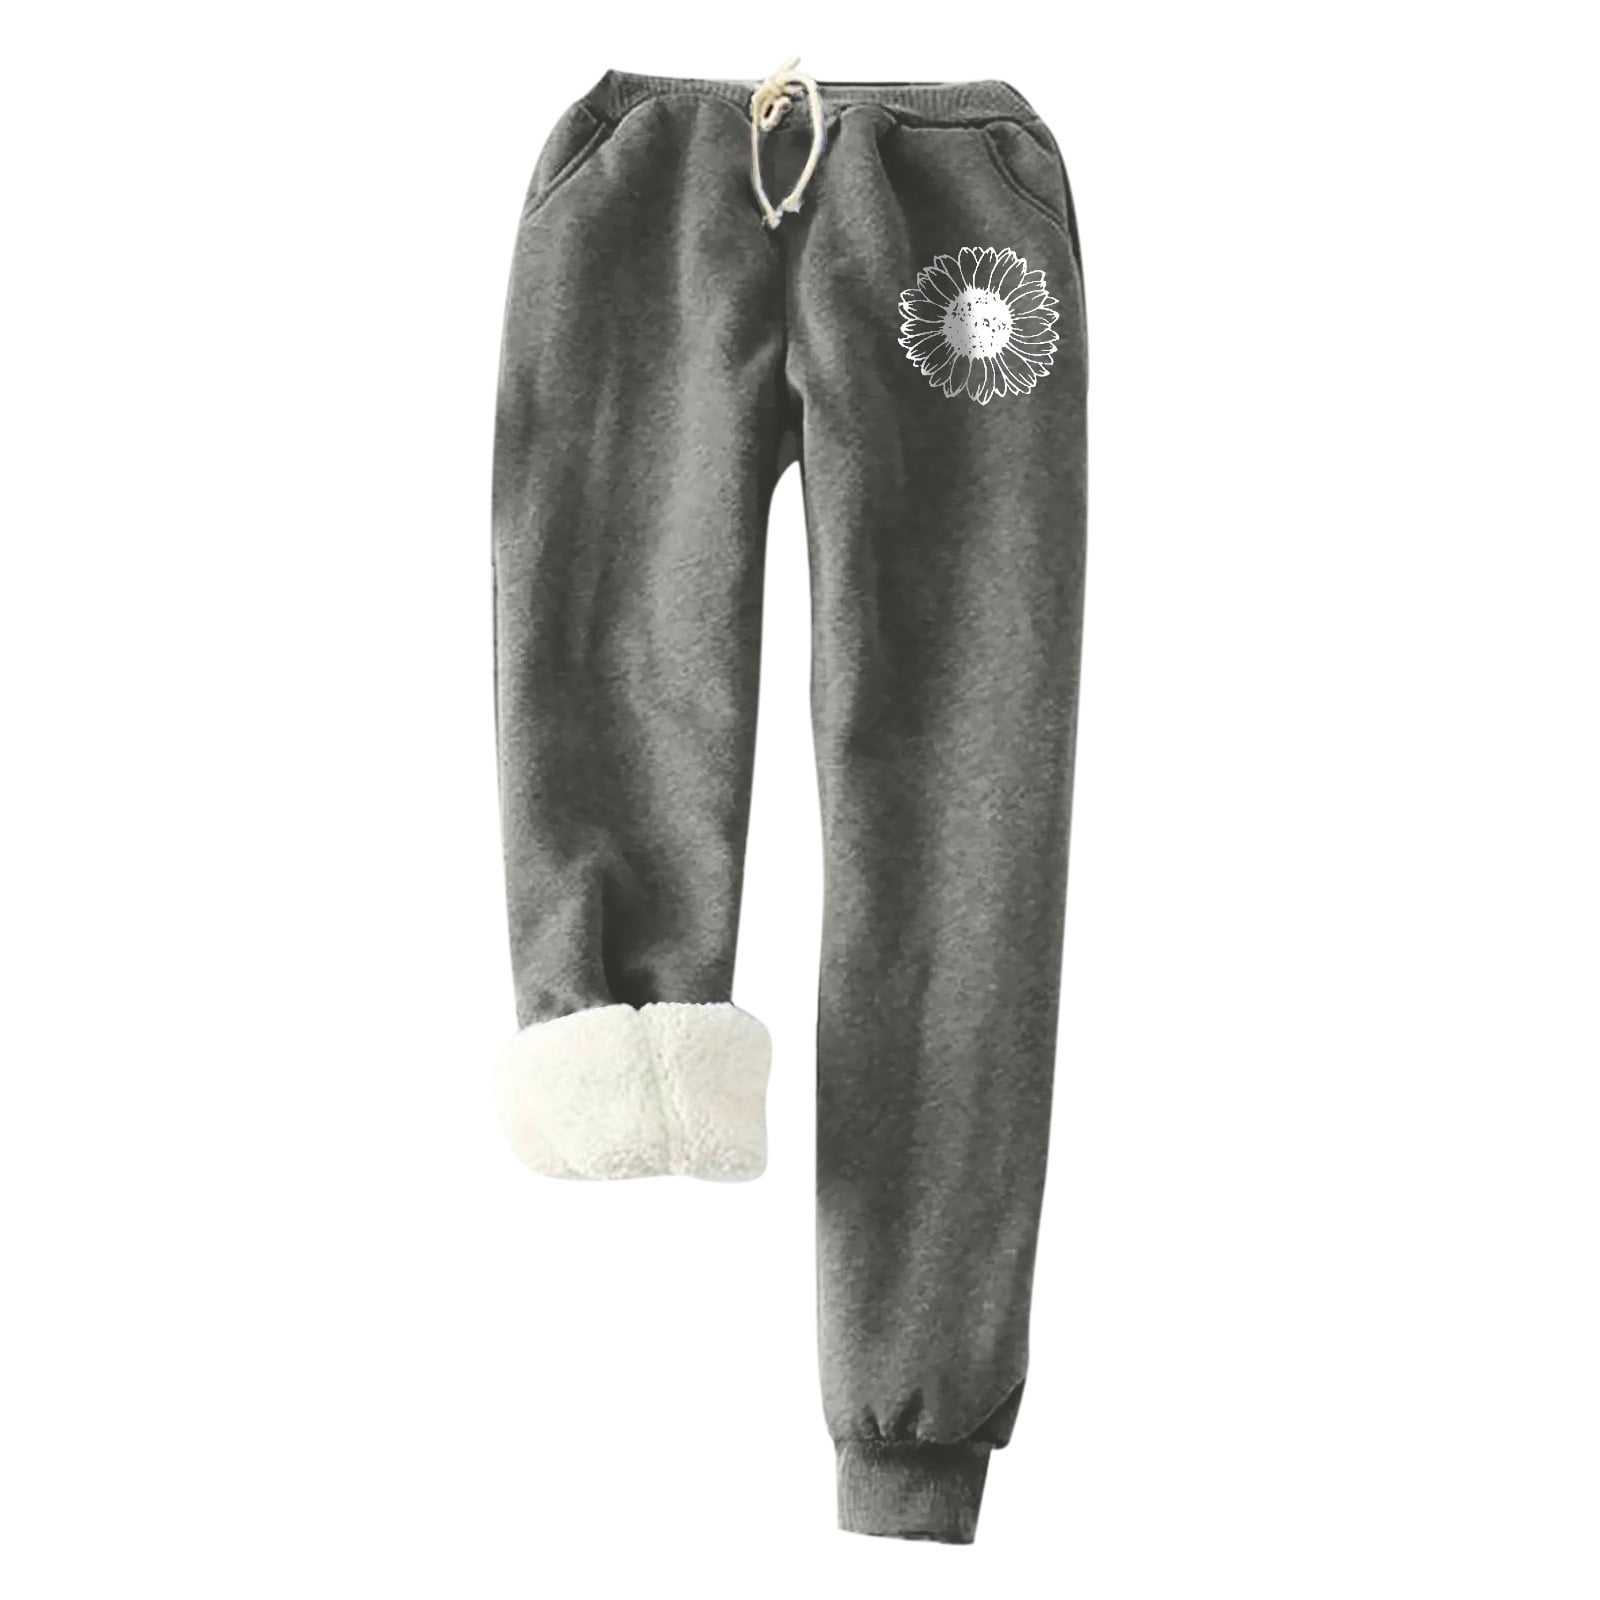 Sales! ZQGJB Women's Fleece Lined Sweatpants Fashion Daisy Print High Waist Sherpa  Lined Winter Warm Cashmere Jogger Pants Super Thick Track Trousers(Gray,M)  